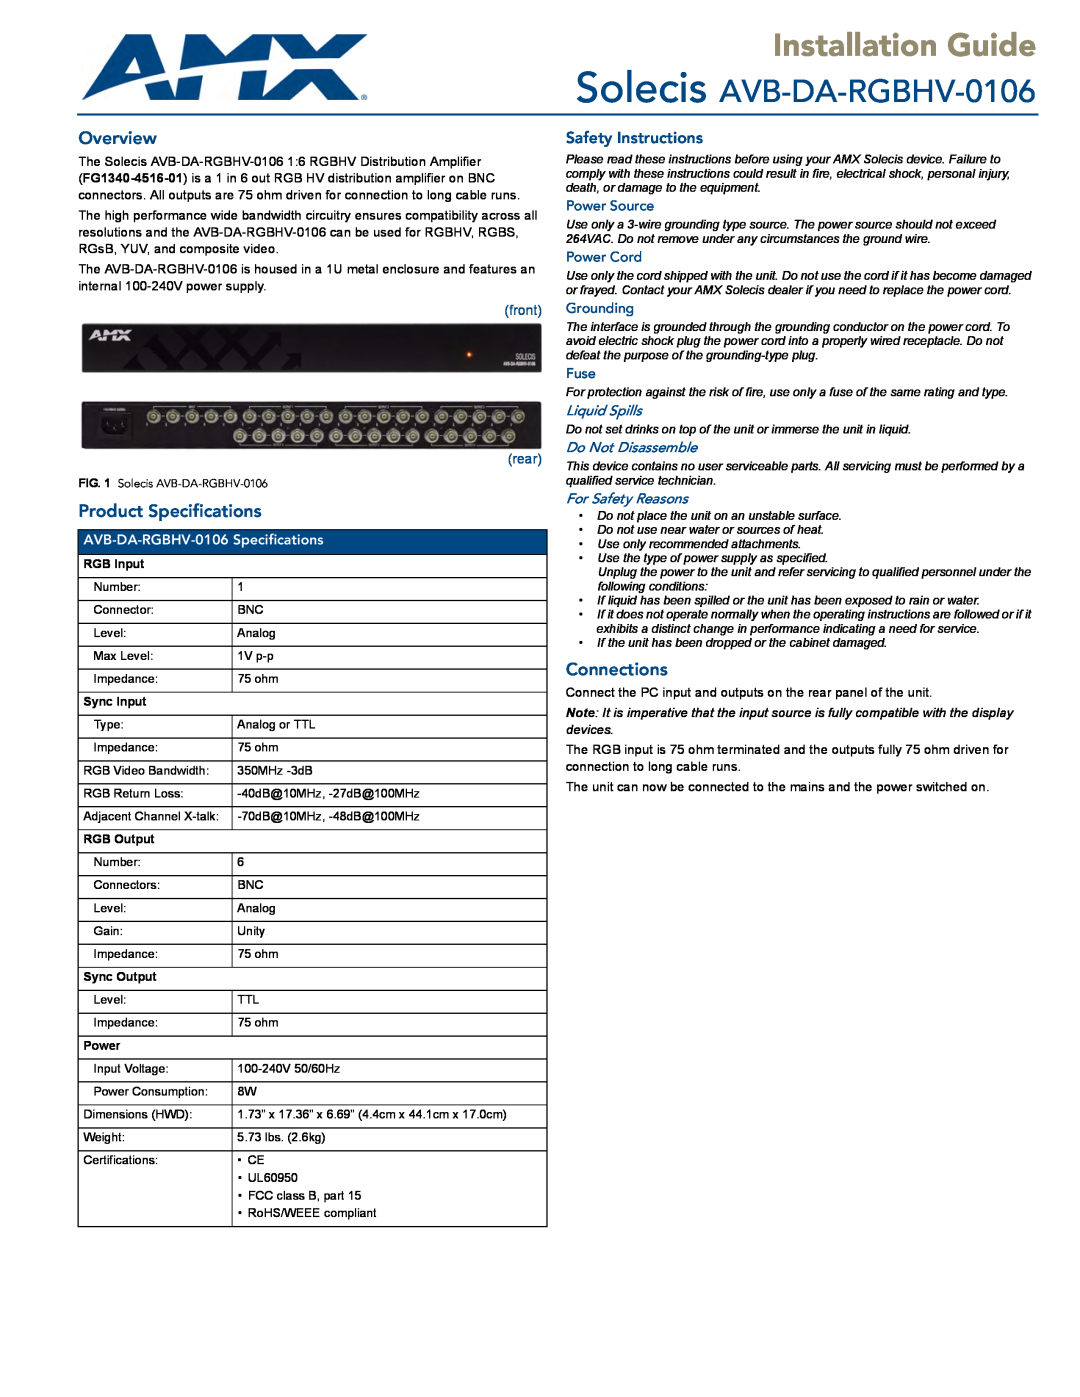 AMX specifications Installation Guide, Solecis AVB-DA-RGBHV-0106, Overview, Product Specifications, Connections, front 